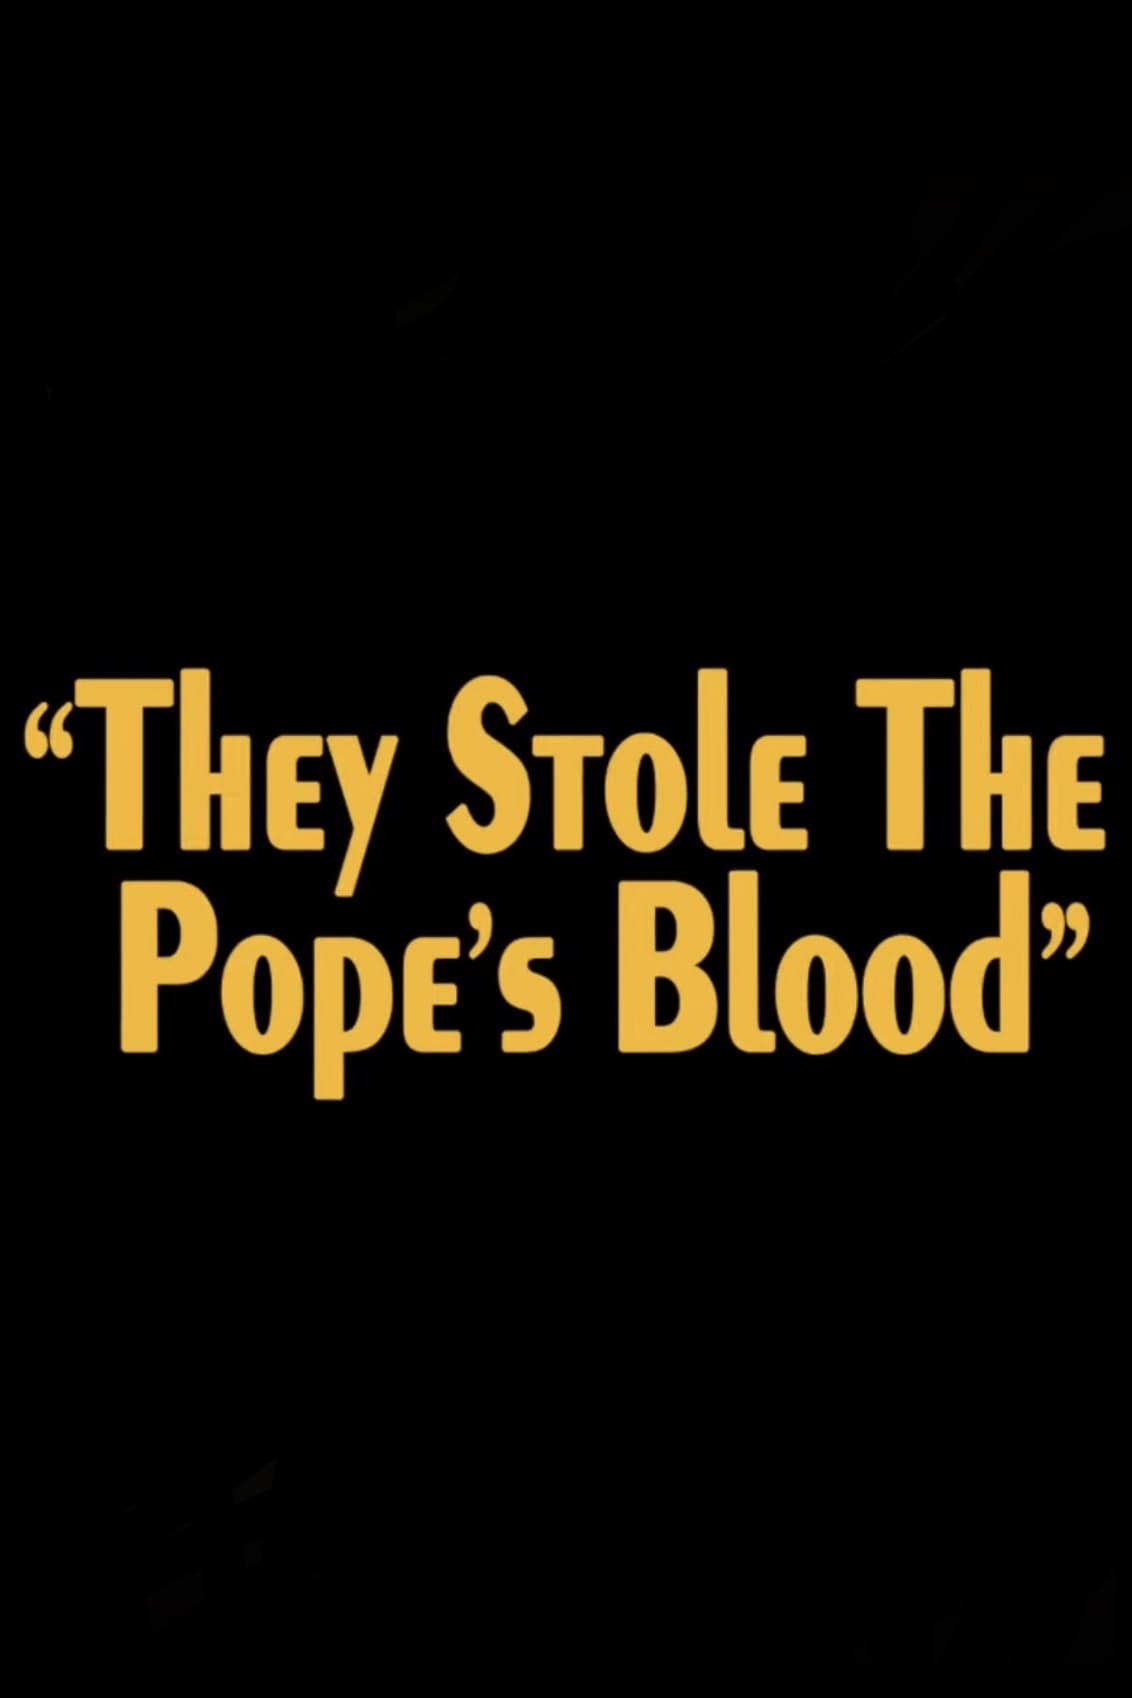 They Stole the Pope's Blood!